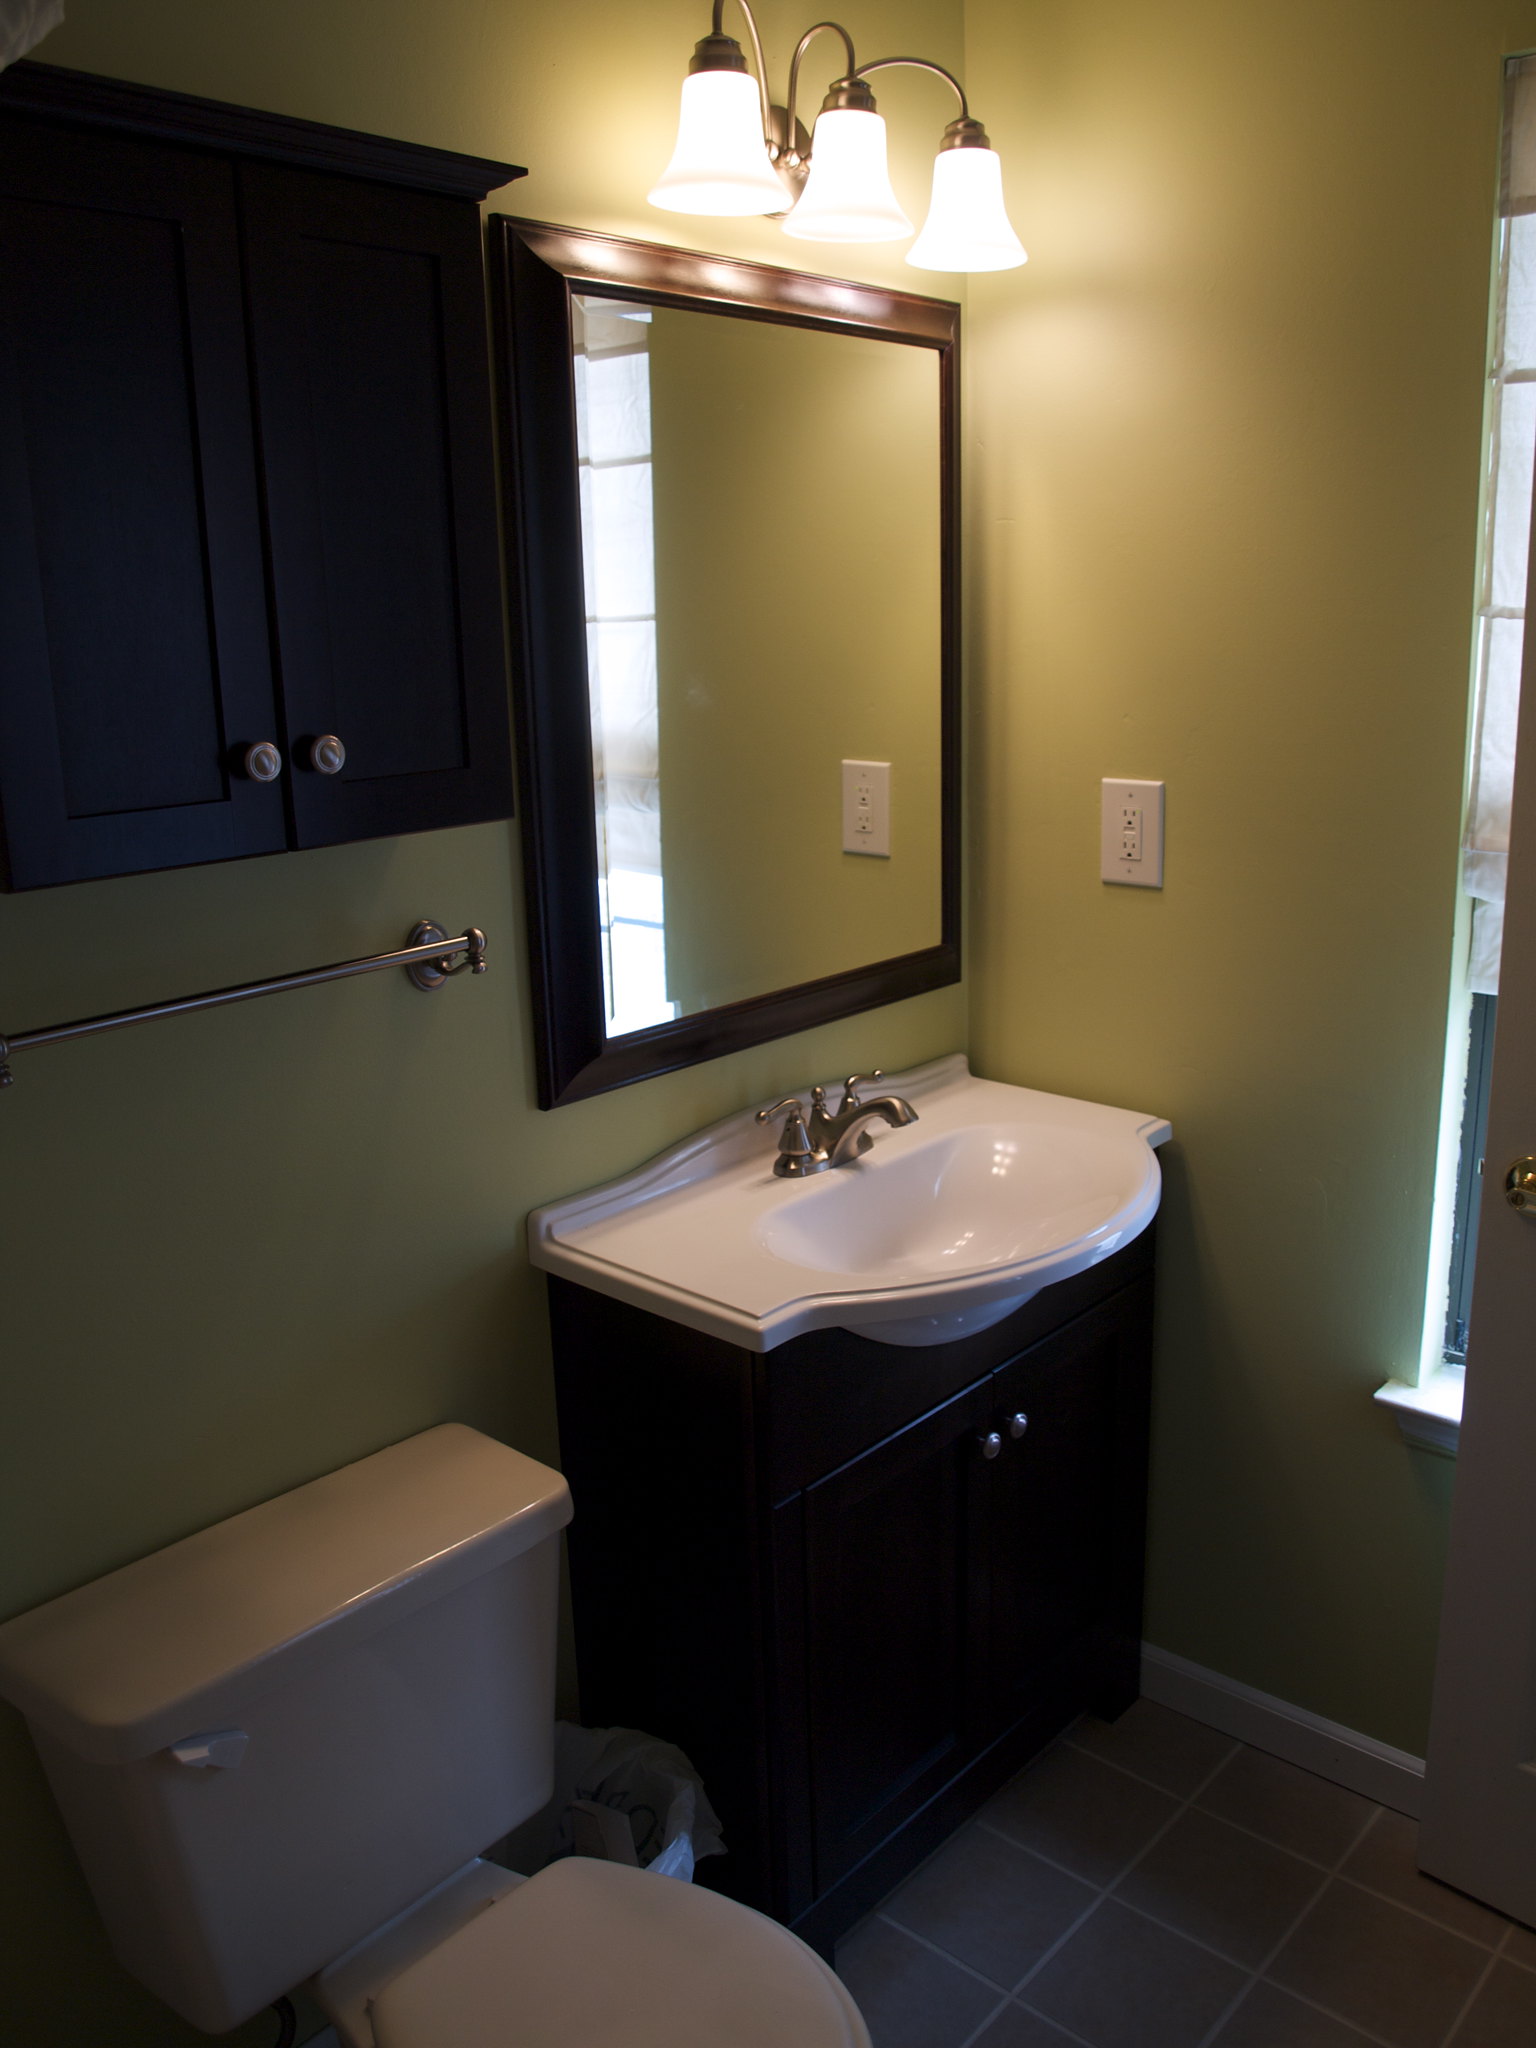 What Makes a Good Home Improvement Company For Remodeling Your Bathroom?